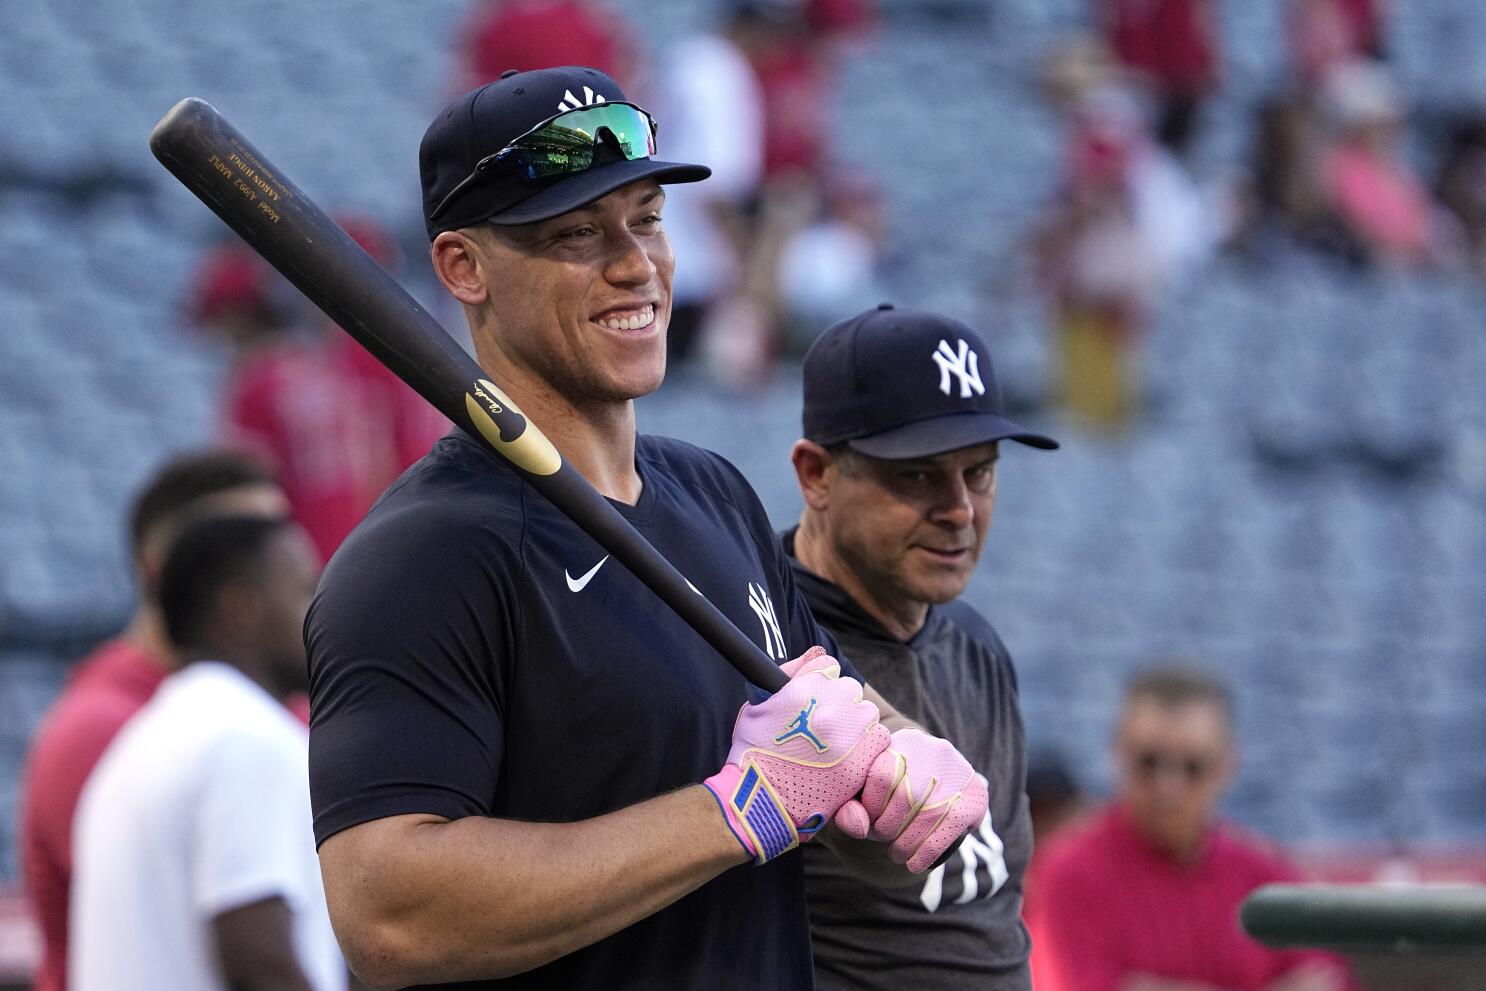 New York Yankees Gift Guide: 10 must-have Aaron Judge items